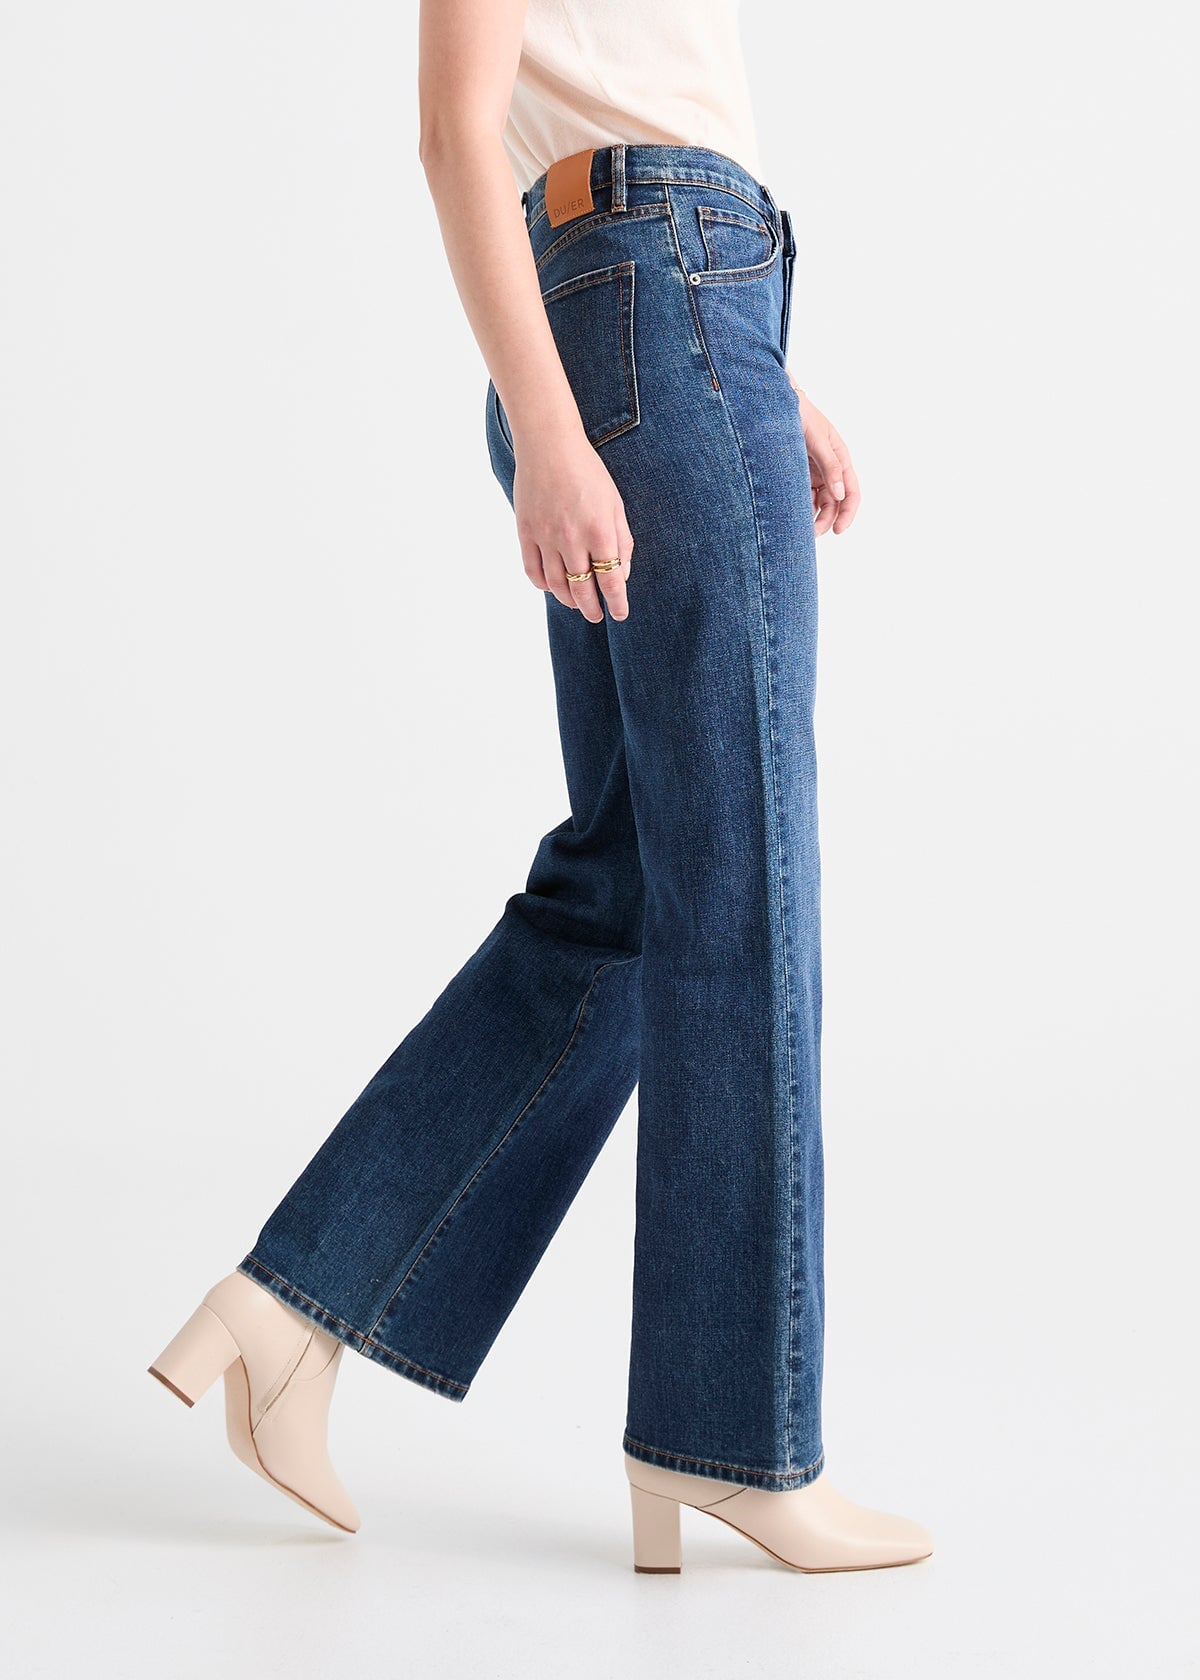 HSMQHJWE Wide Leg Jeansladies Pants Size 14 Jeans Zppered High-Waisted  Temperament Slim-Fit Four-Button Women'S Stretch Women'S Jeans High Waist  Pants